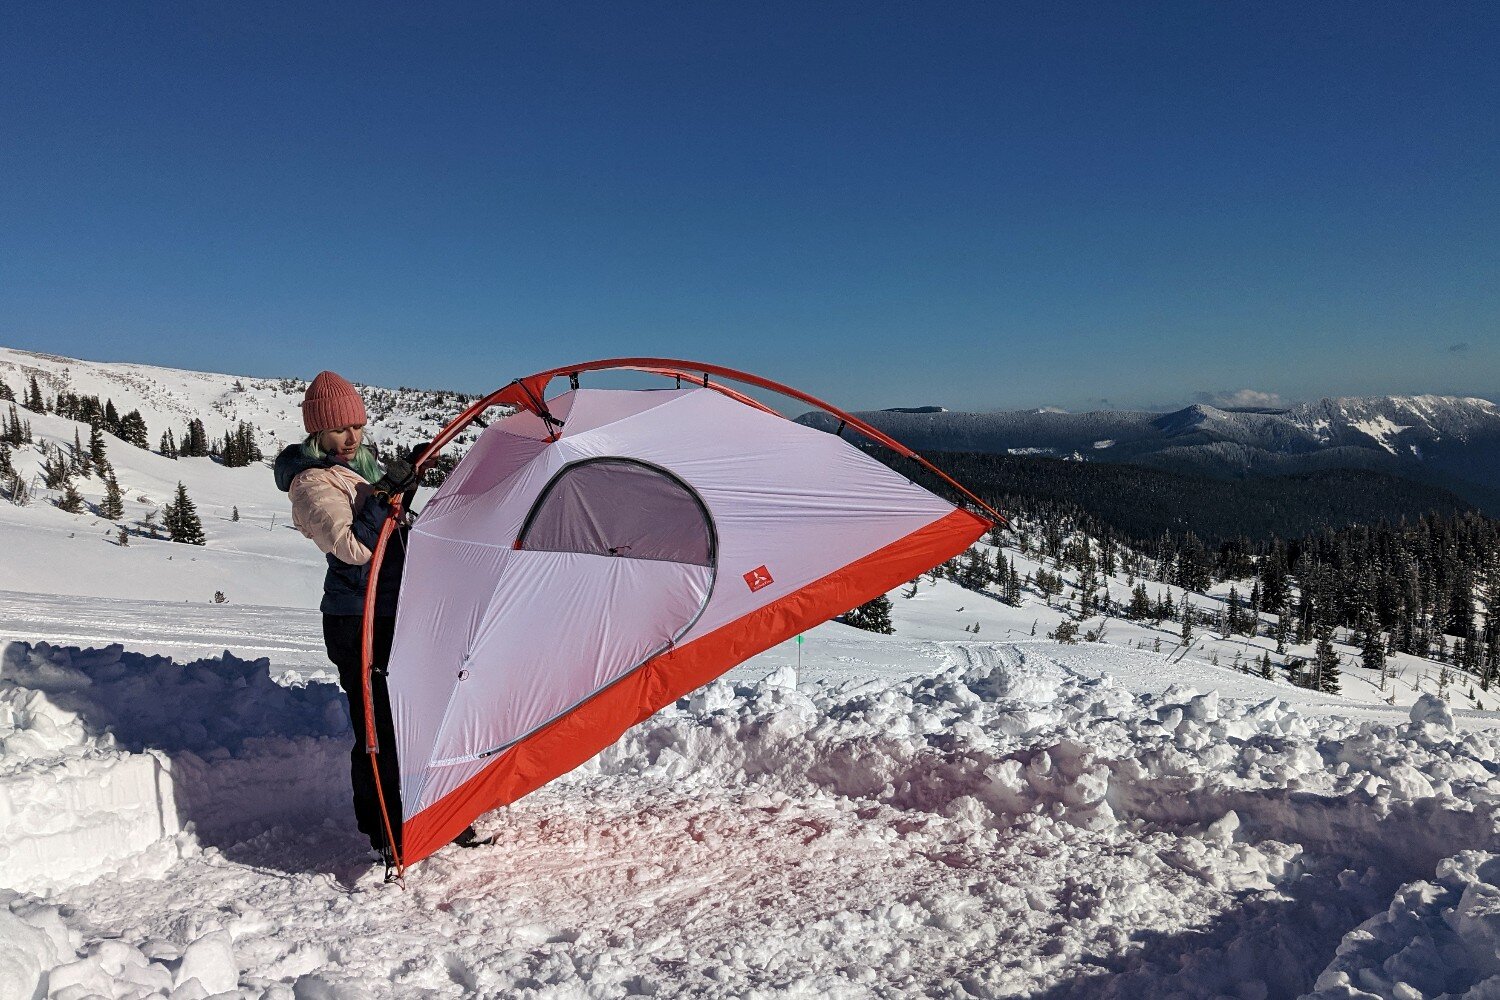 We typically don’t bring a footprint for winter camping since extra floor durability isn’t a concern on the snow.